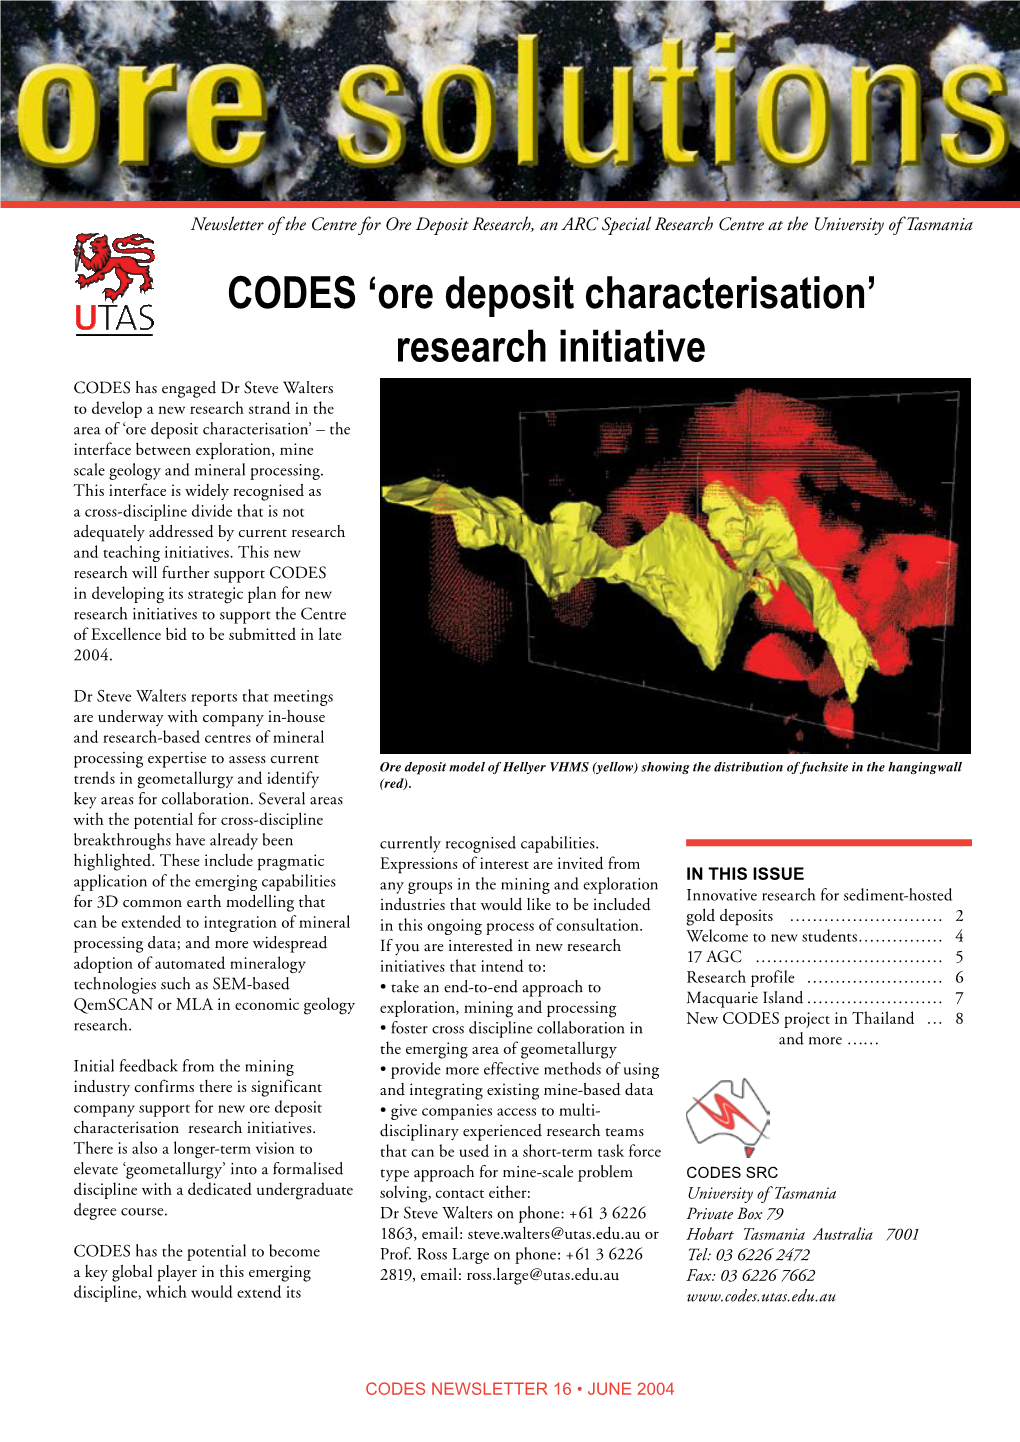 CODES 'Ore Deposit Characterisation' Research Initiative